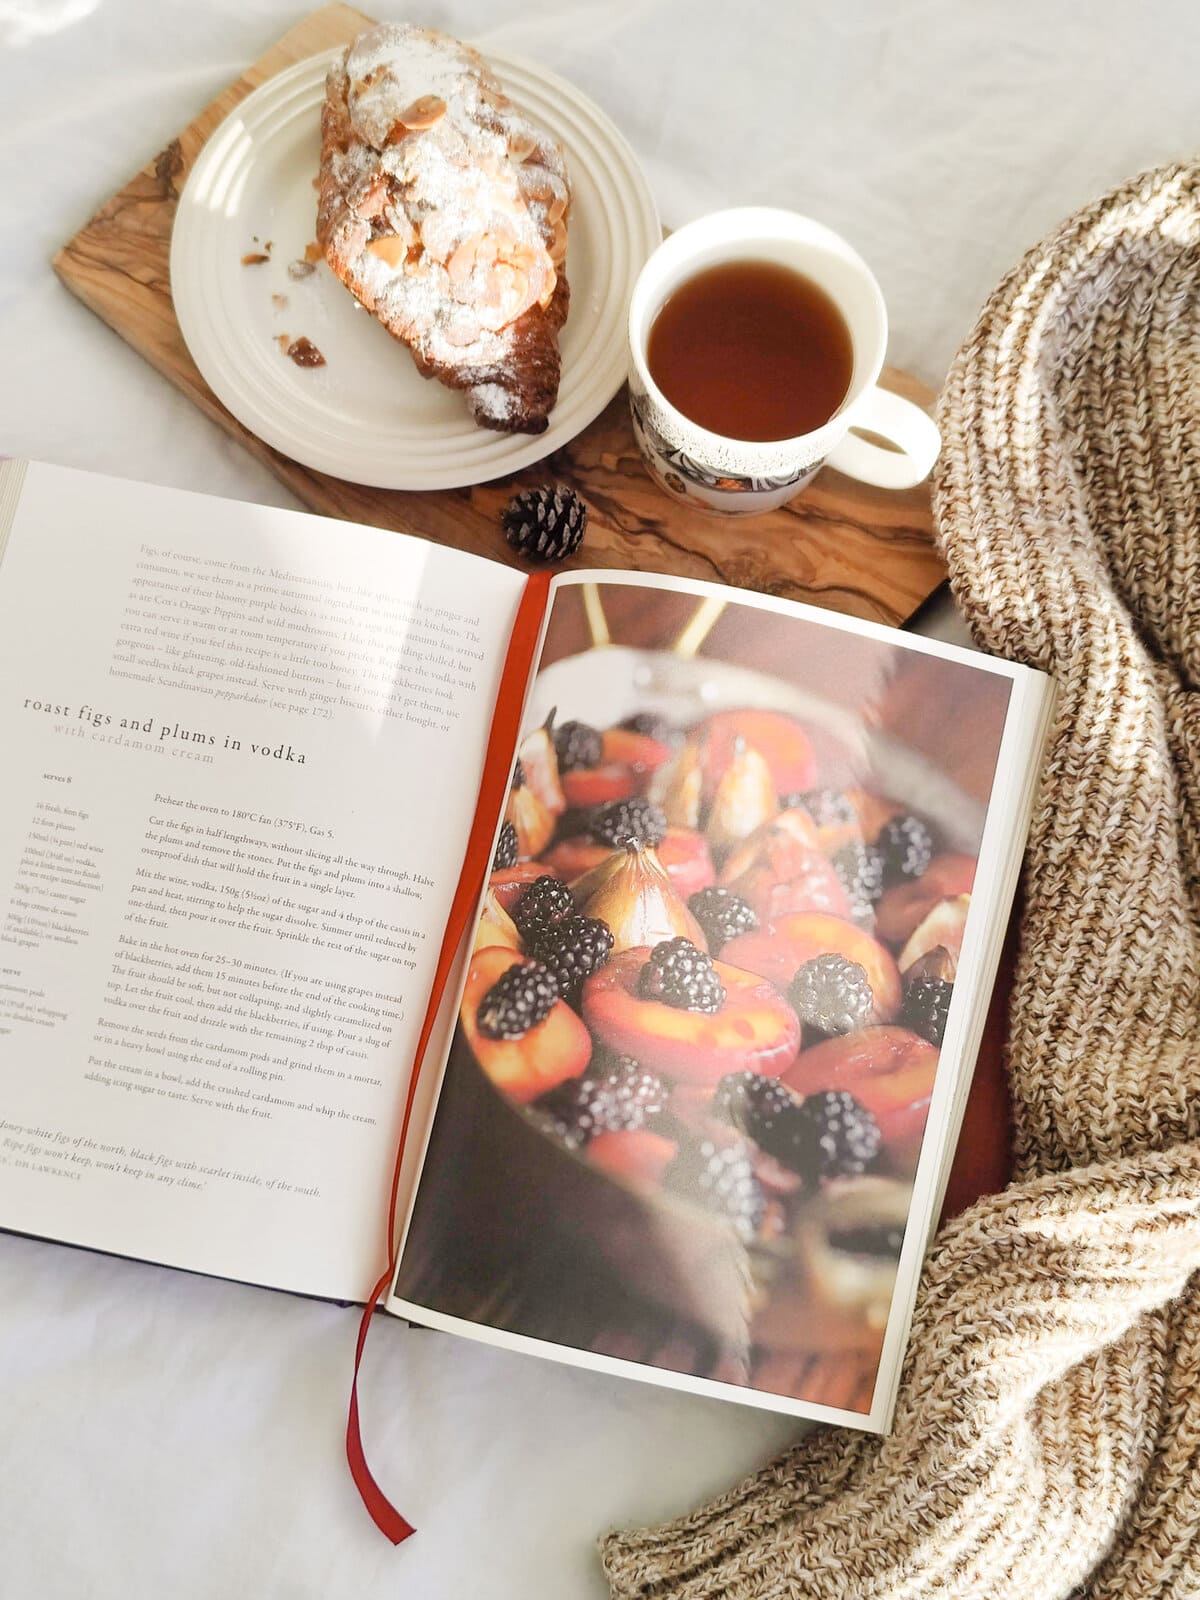 Roast figs and plums in vodka recipe page in Roast Figs, Sugar Snow by Diana Henry in cozy setting with tea and pastry